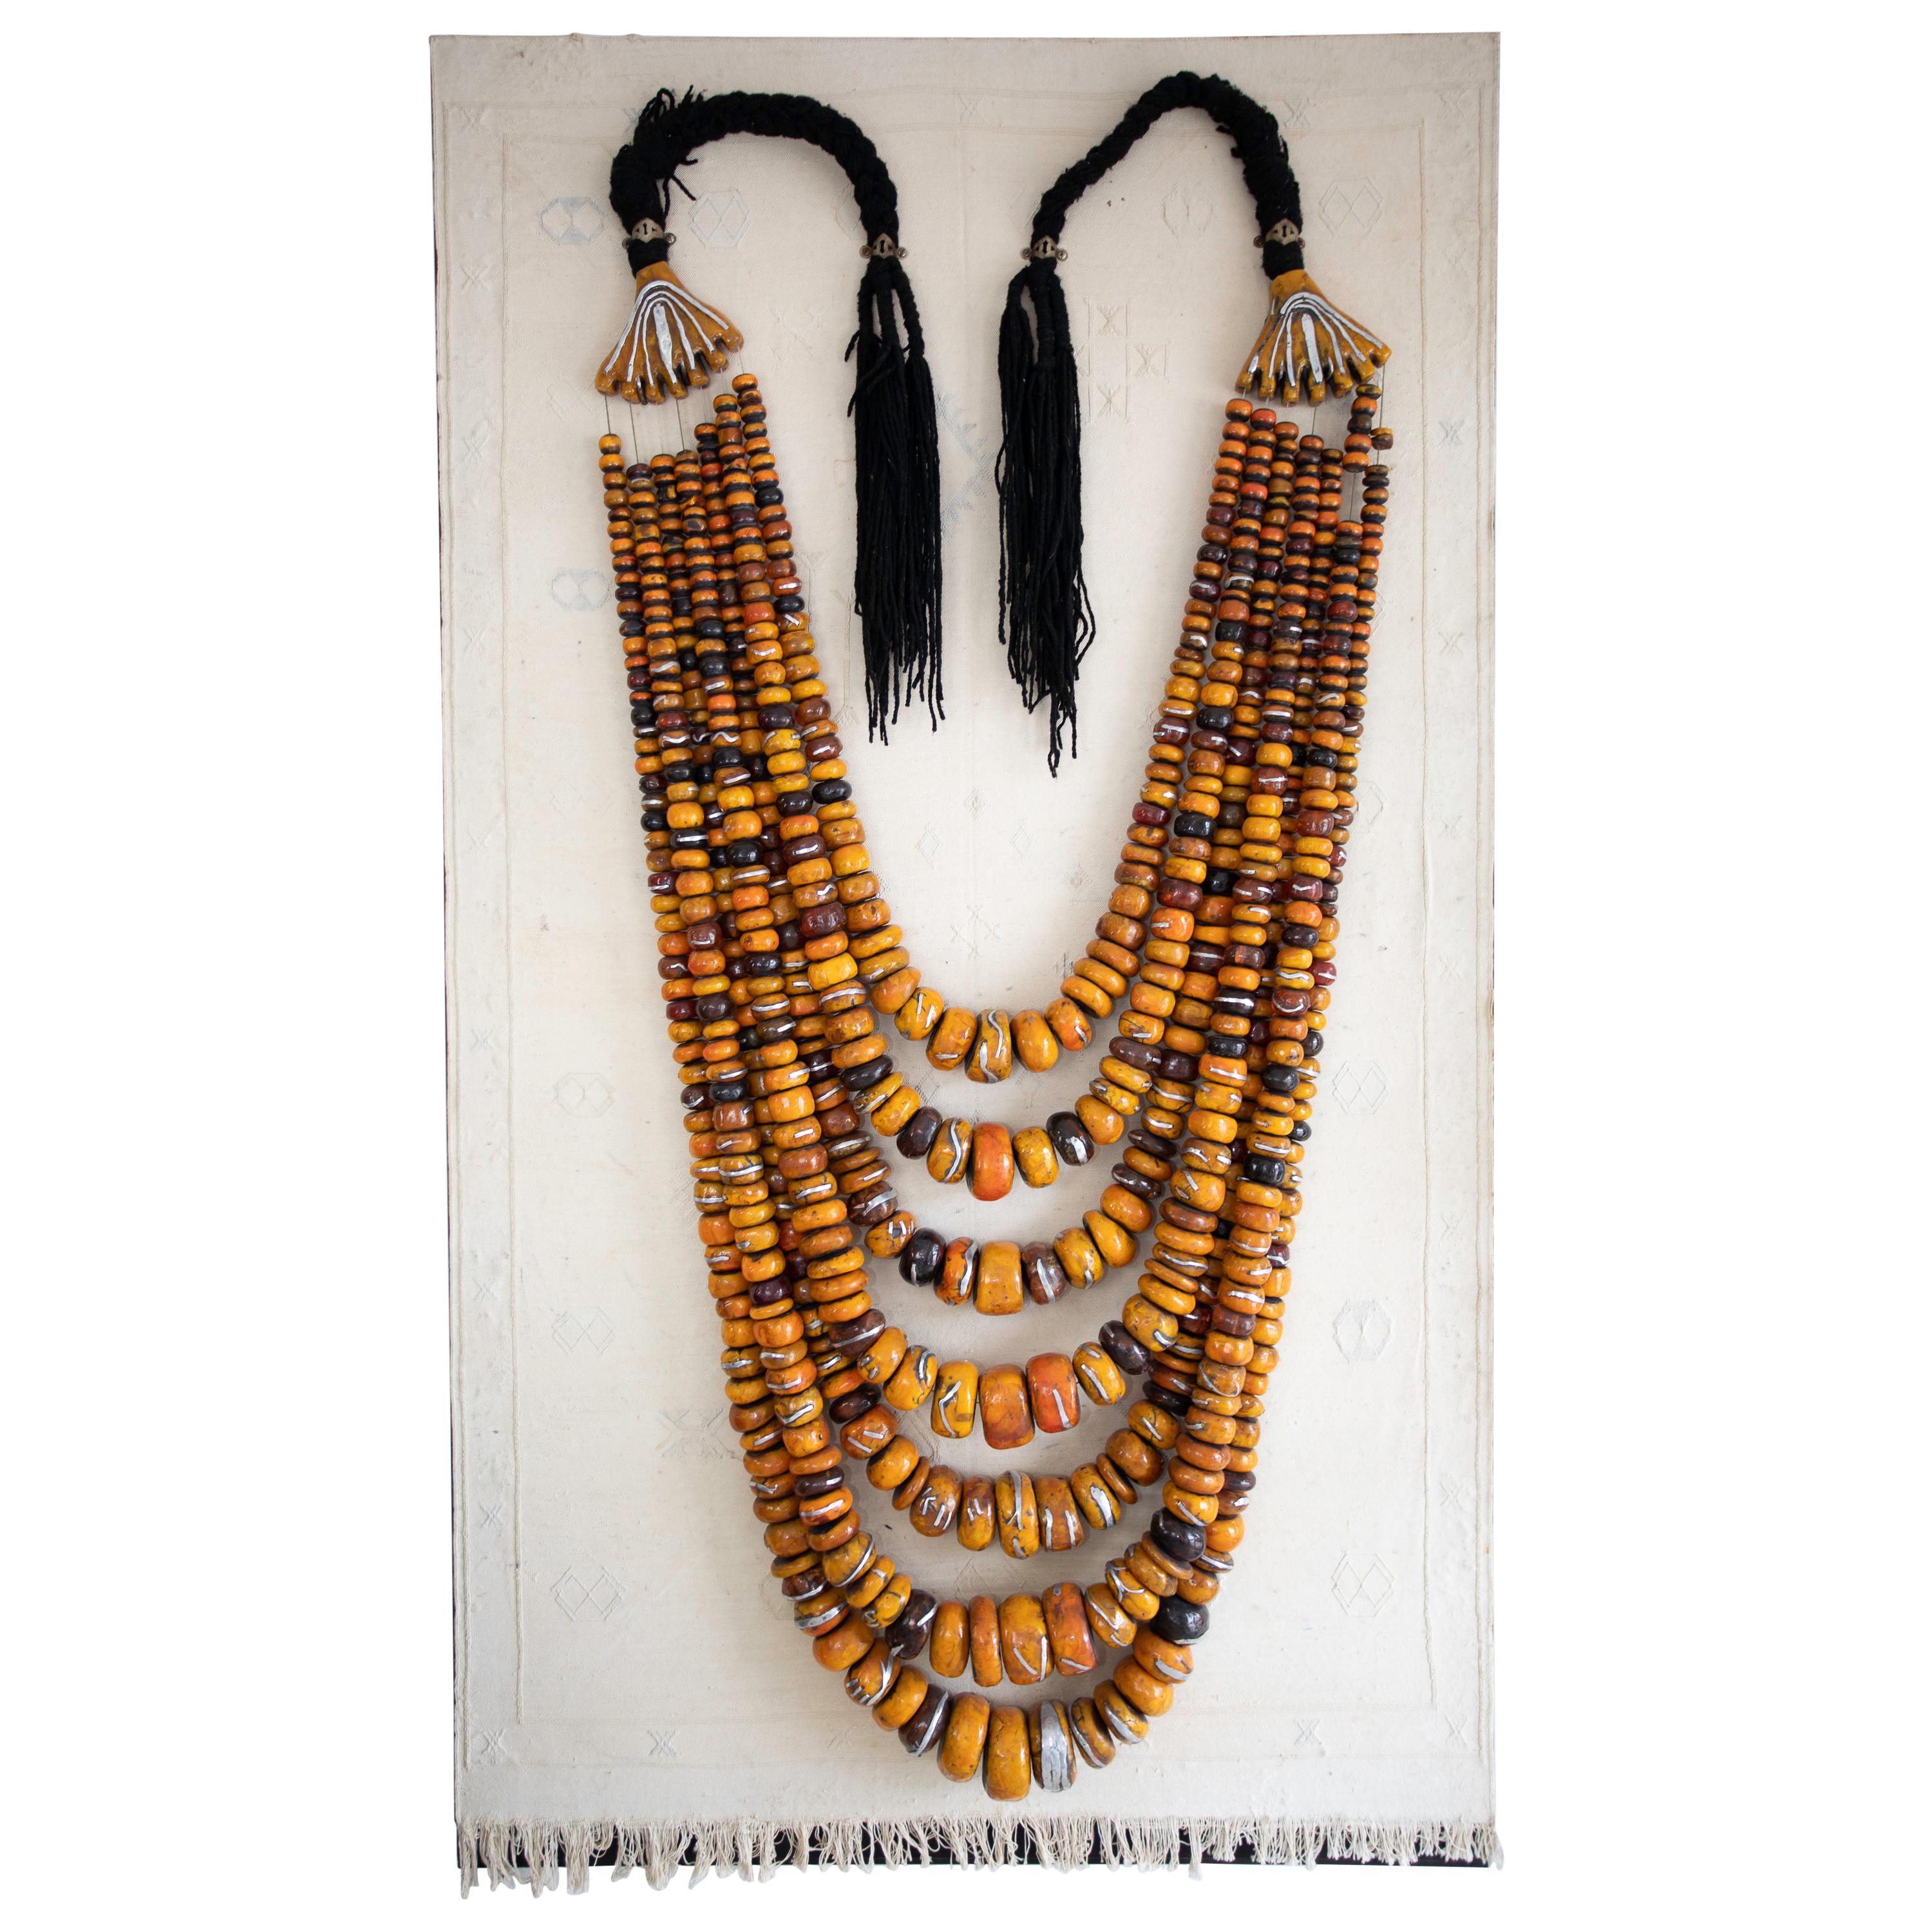 Huge Moroccan Amber Necklace Wall Art